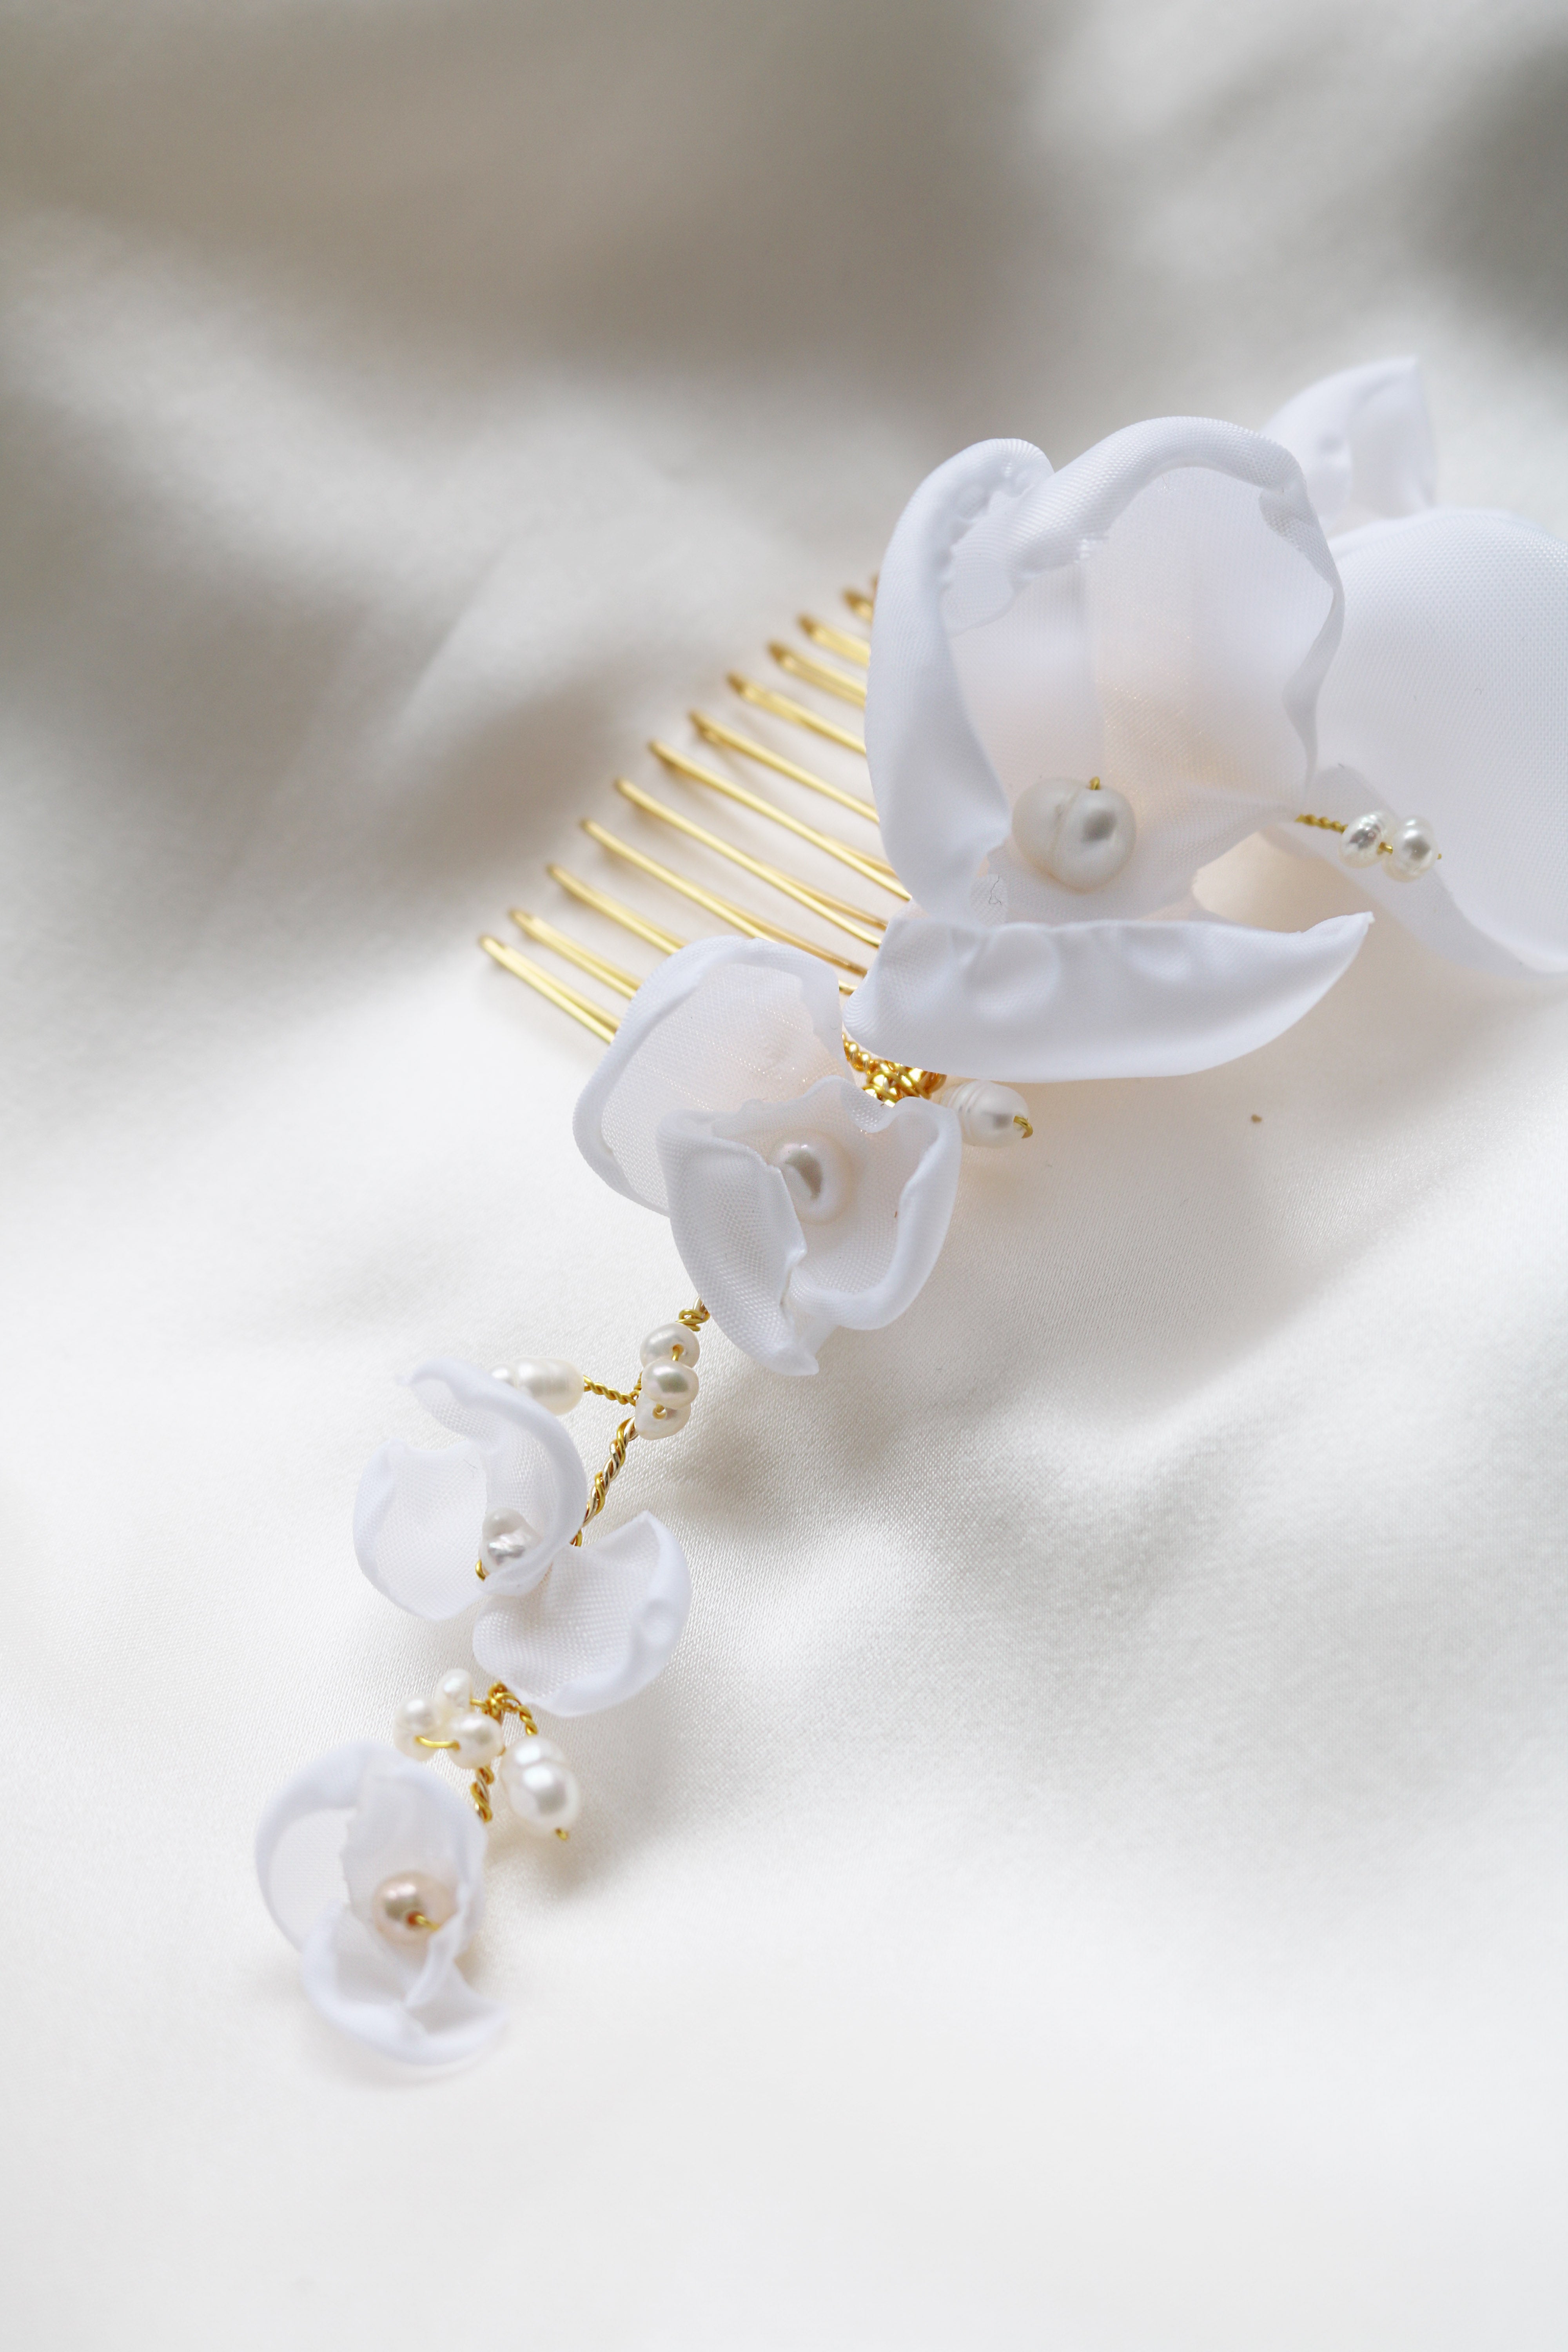 Averie Floral and Organic Pearl Hairpiece-2